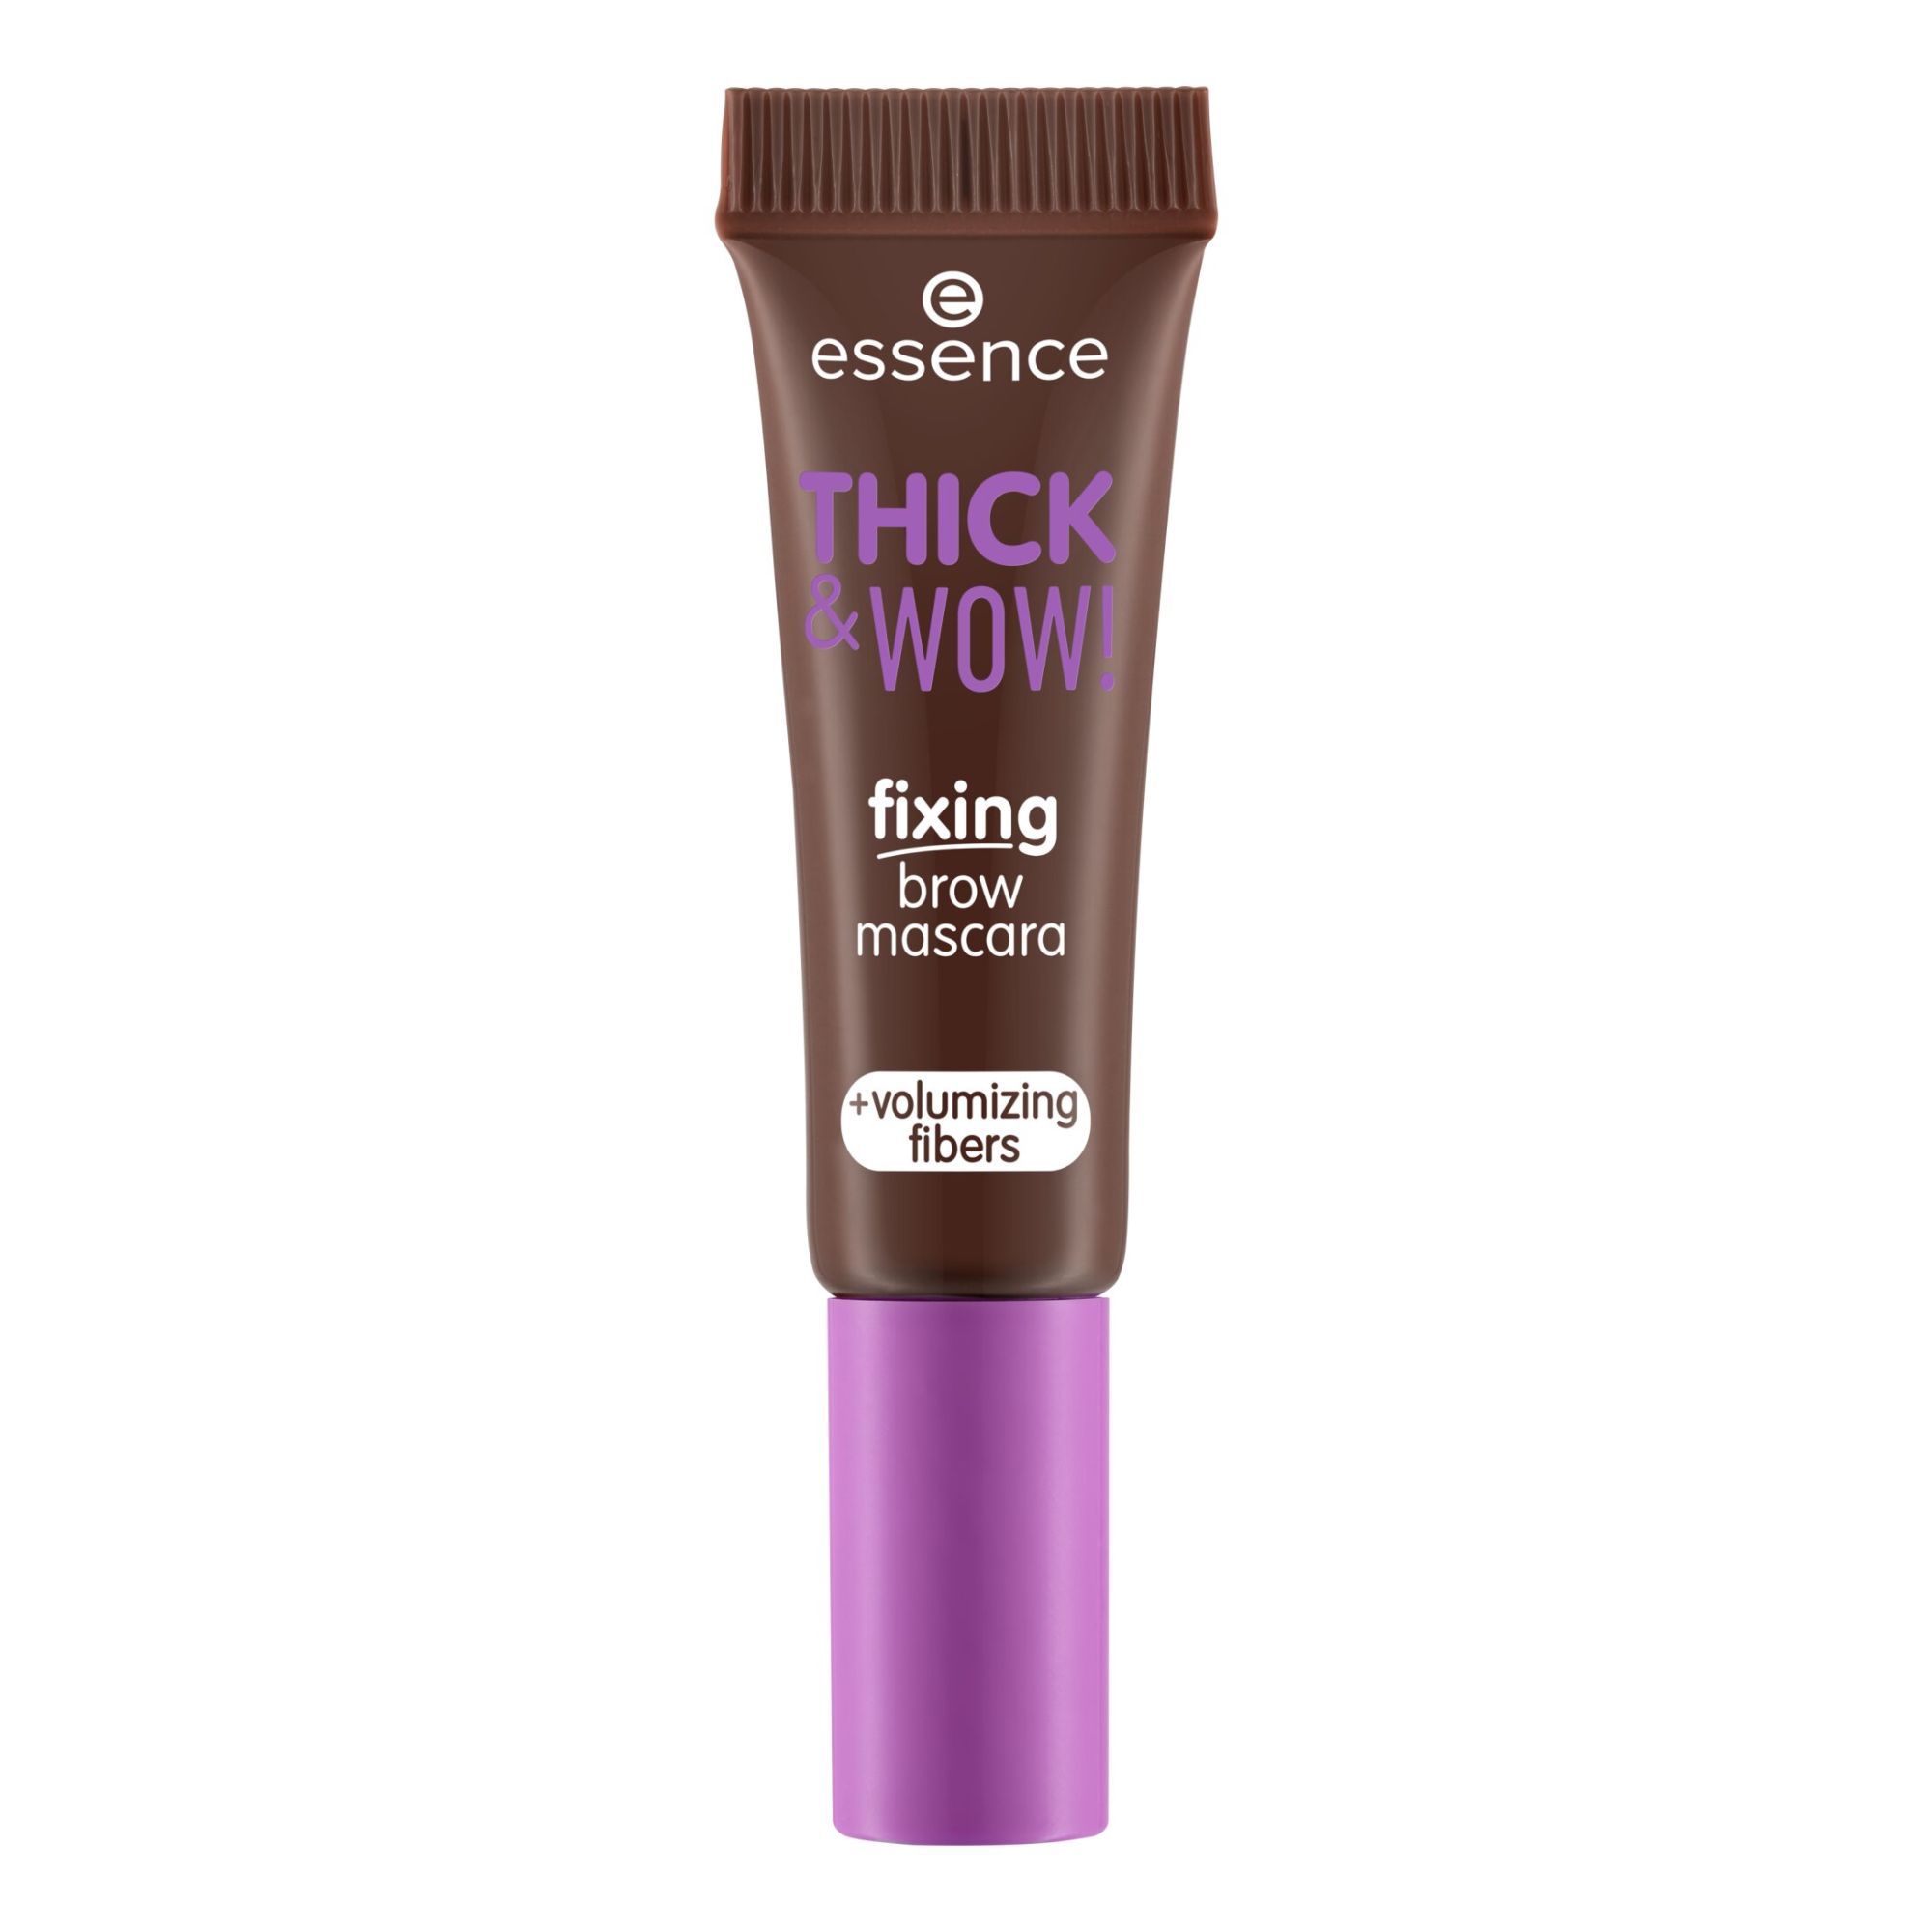 Thick & Wow! Fixing Brow Mascara